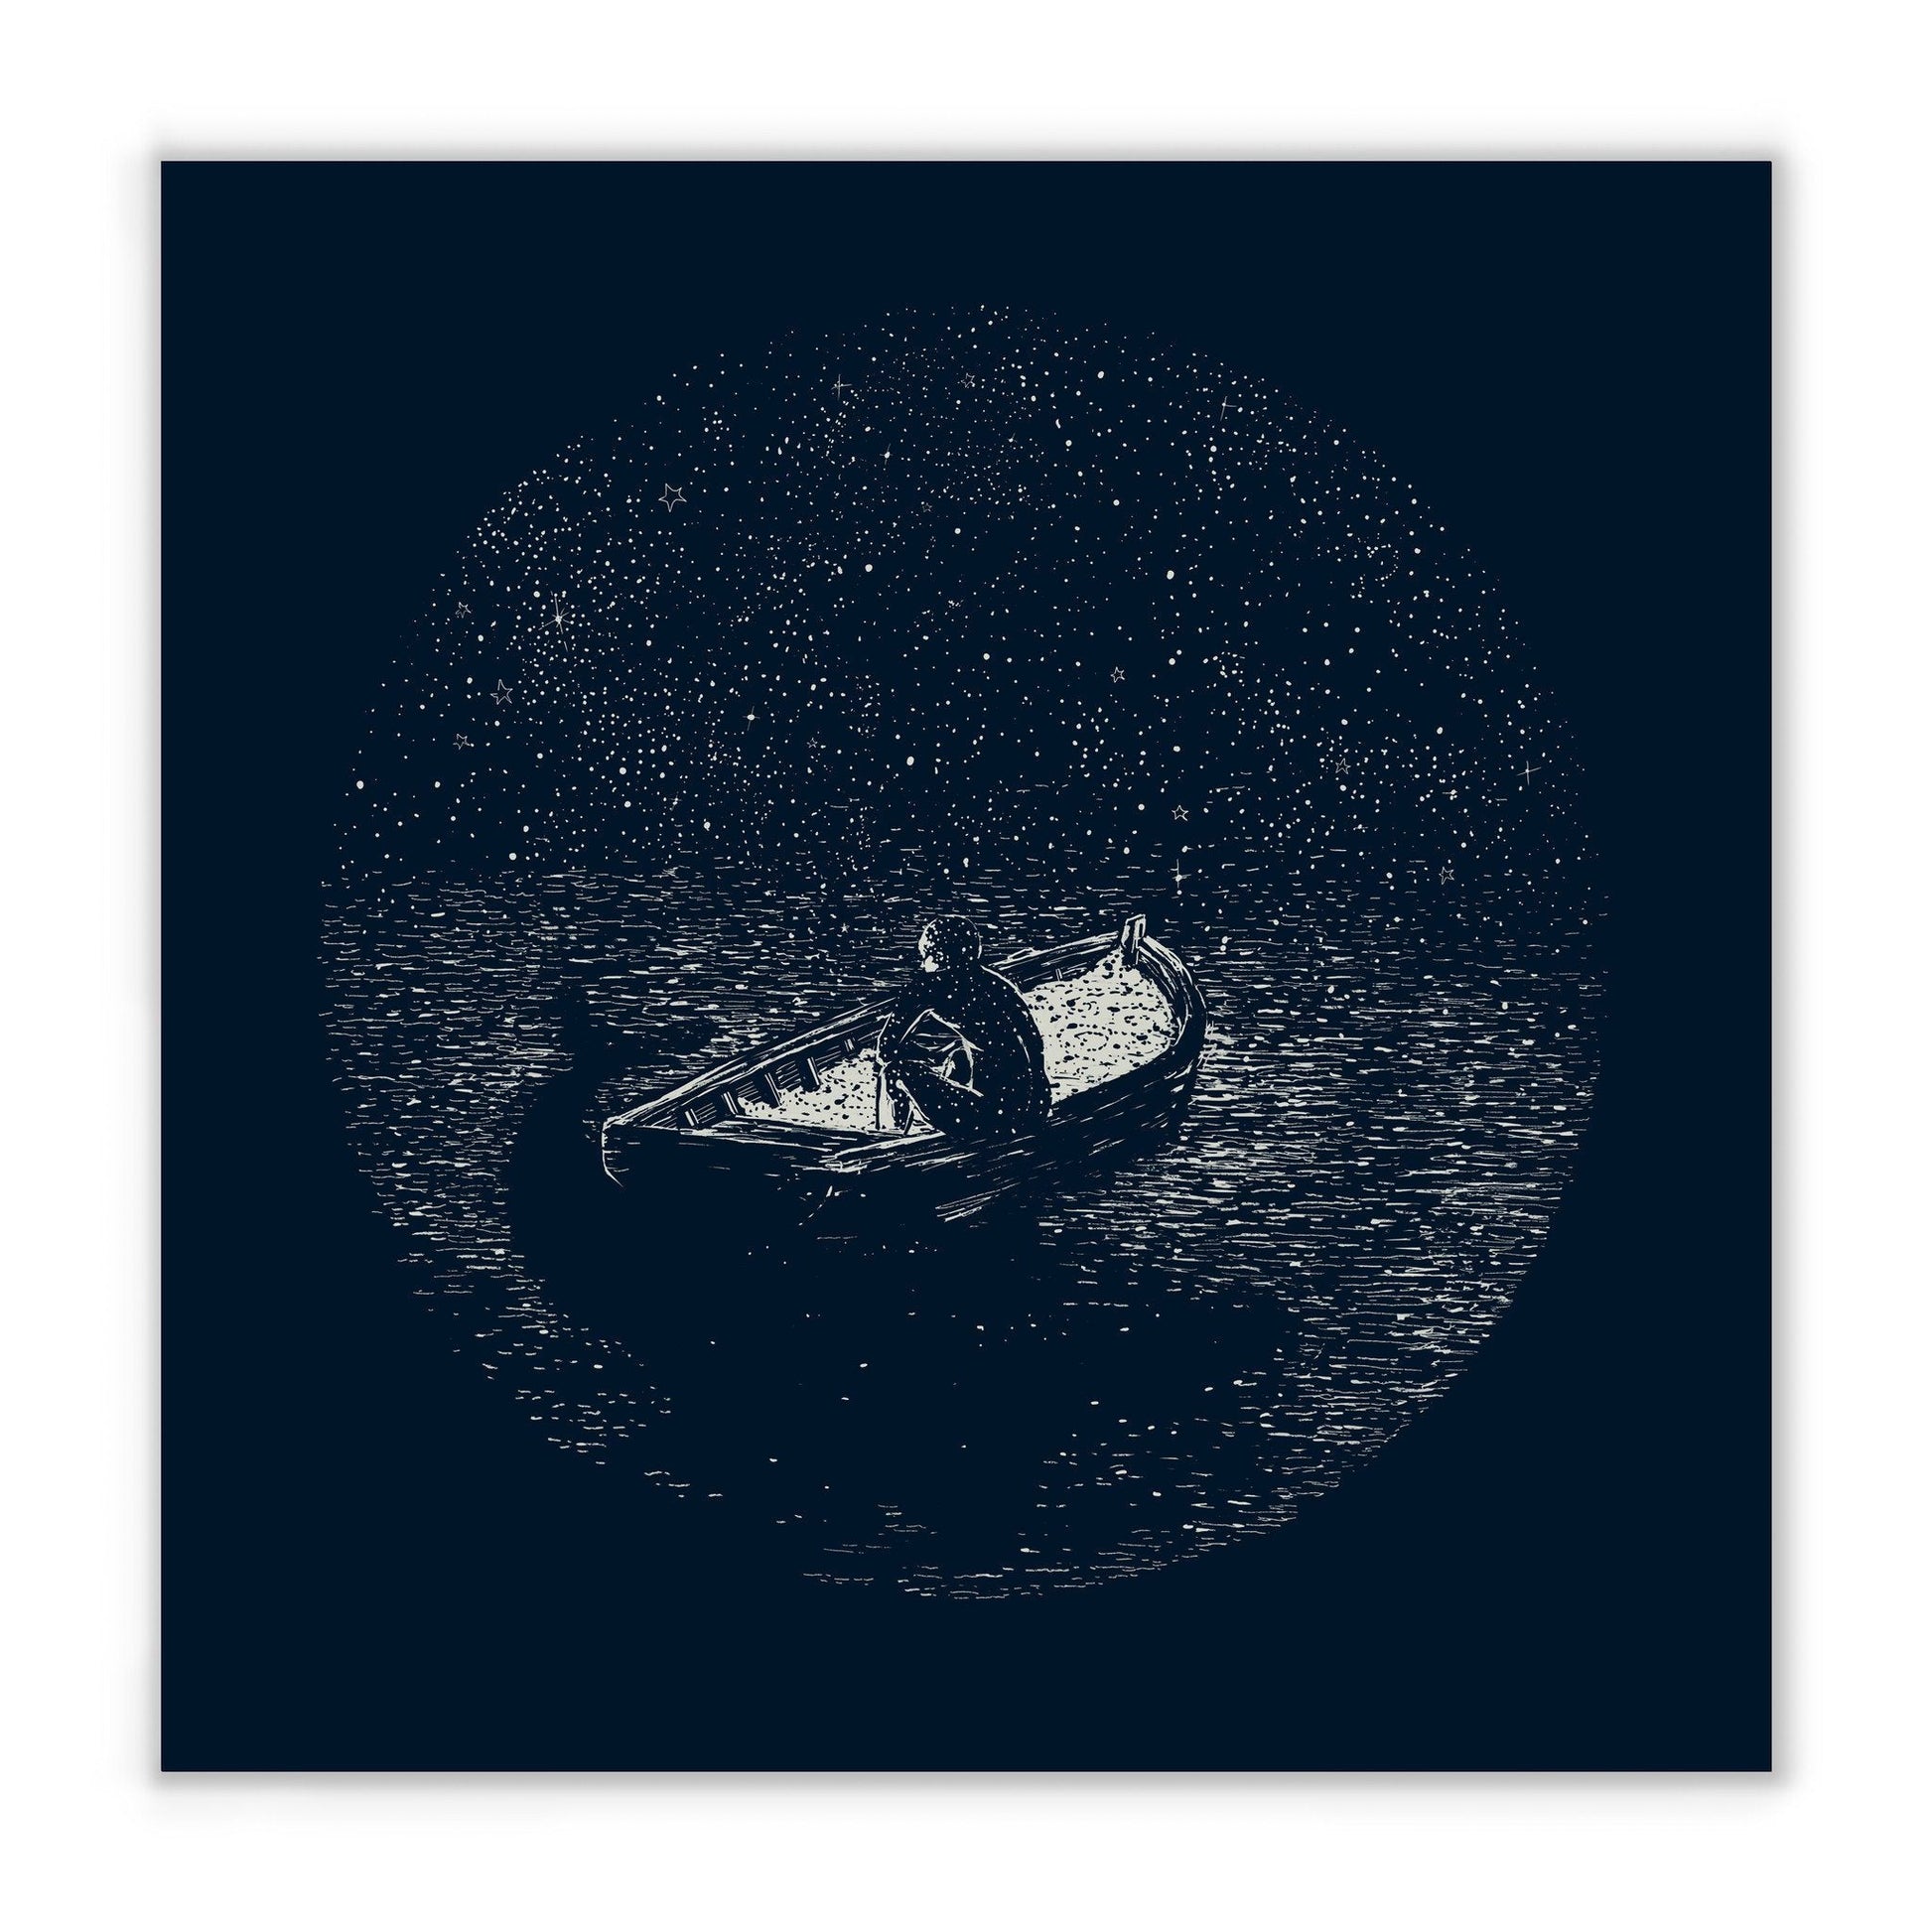 Mr. Man Meets the Night (Limited Edition of 50) Print James R. Eads